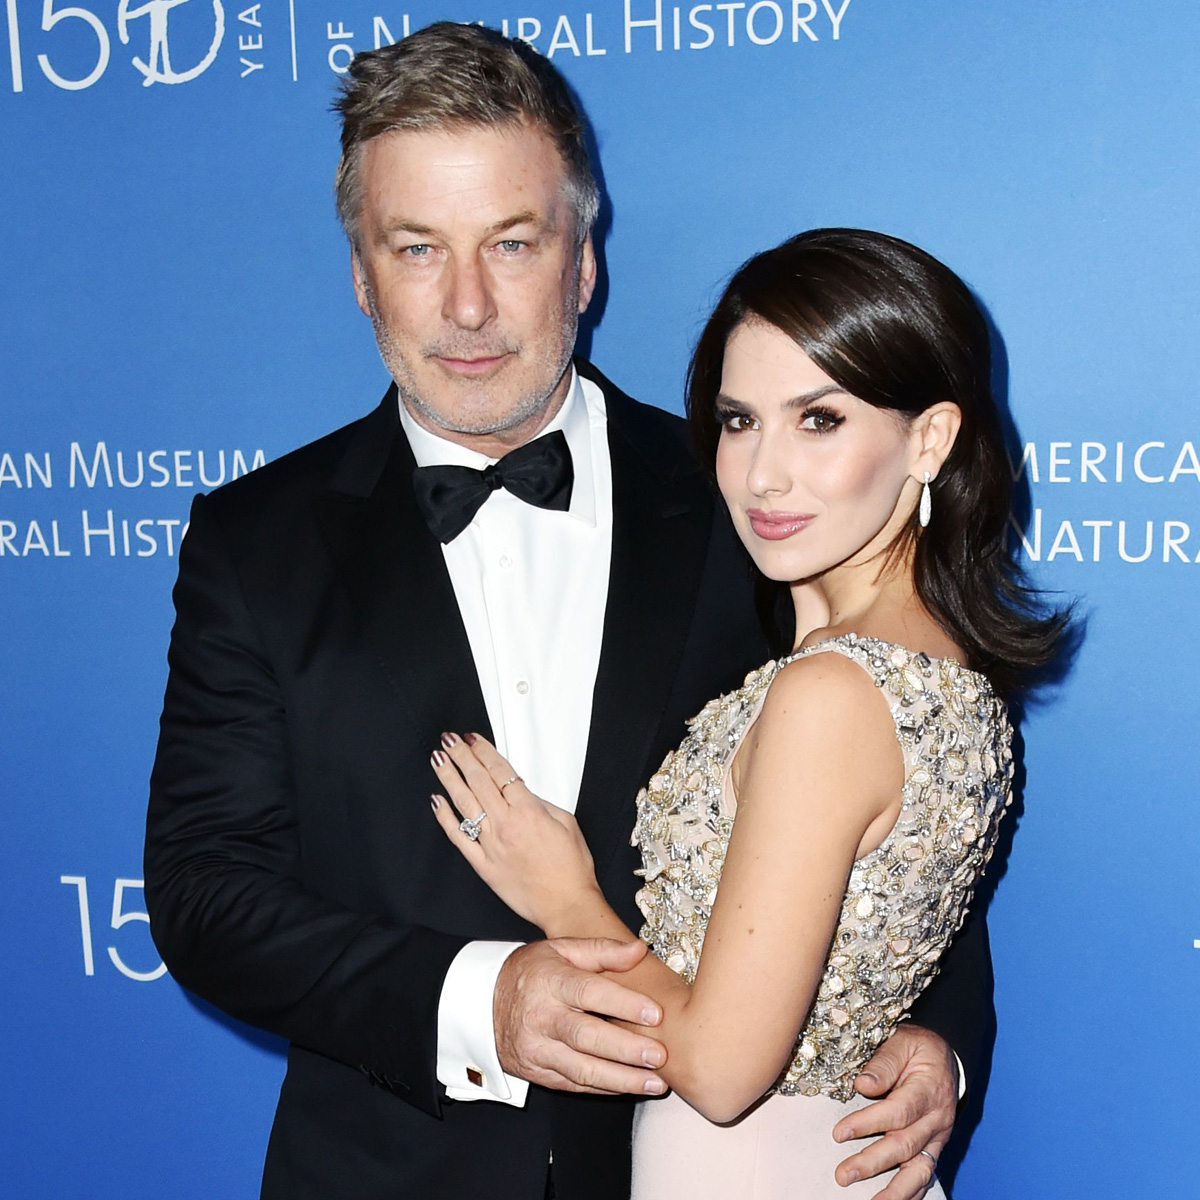 Alec Baldwin defends Hilaria after she is accused of faking accent